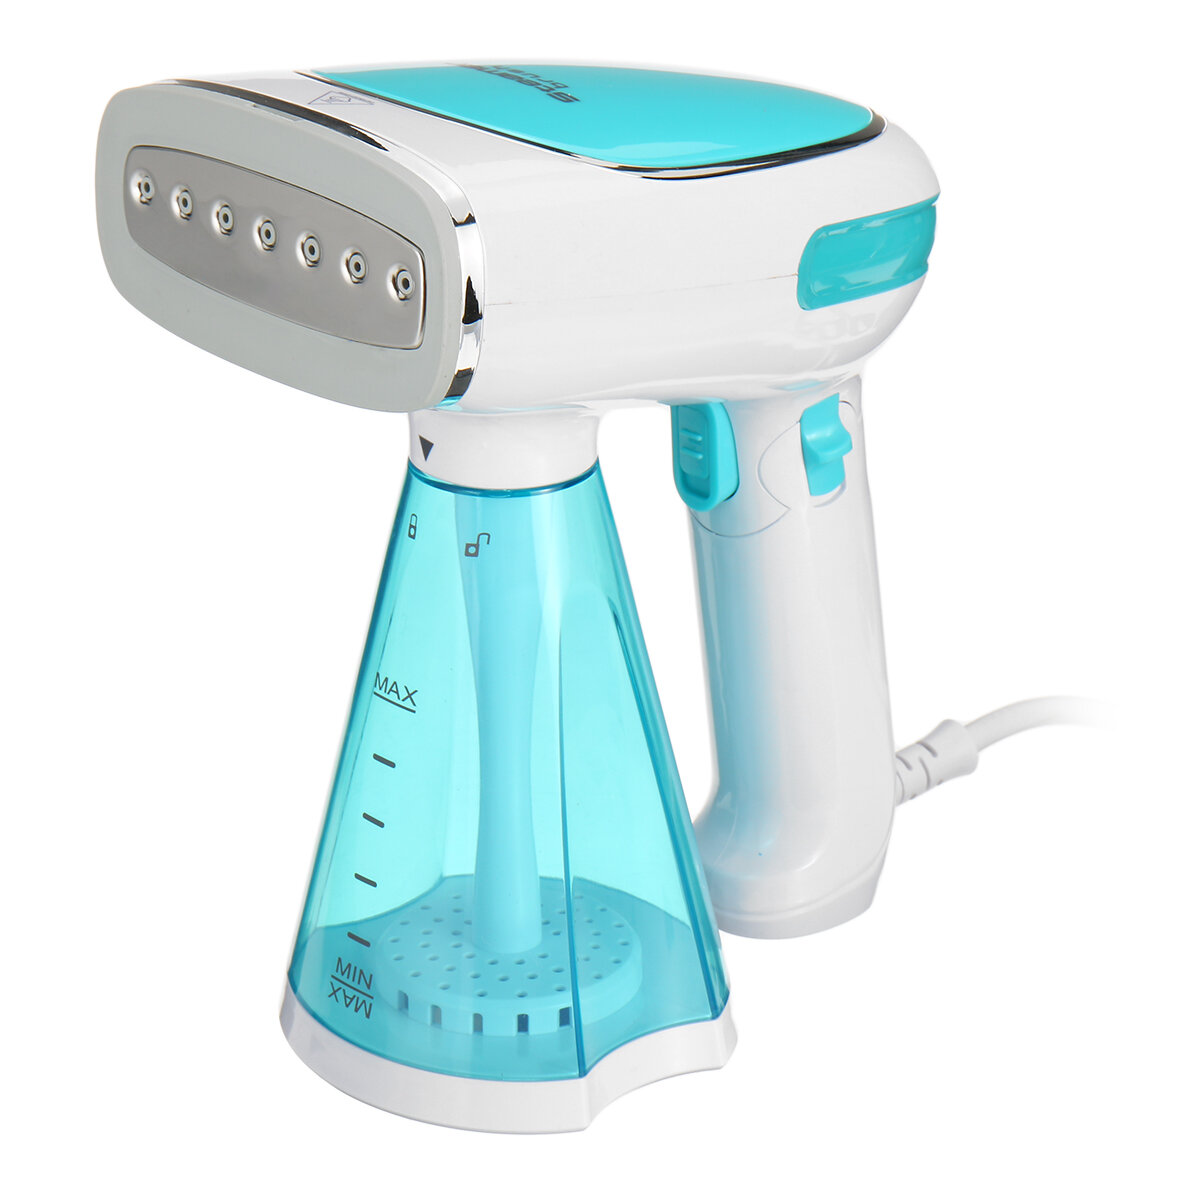 

Handheld Portable Foldable Garment Steamer 1500W Powerful Clothes Steam Iron Fast Heat-up Fabric Wrinkle Removal 280ml W